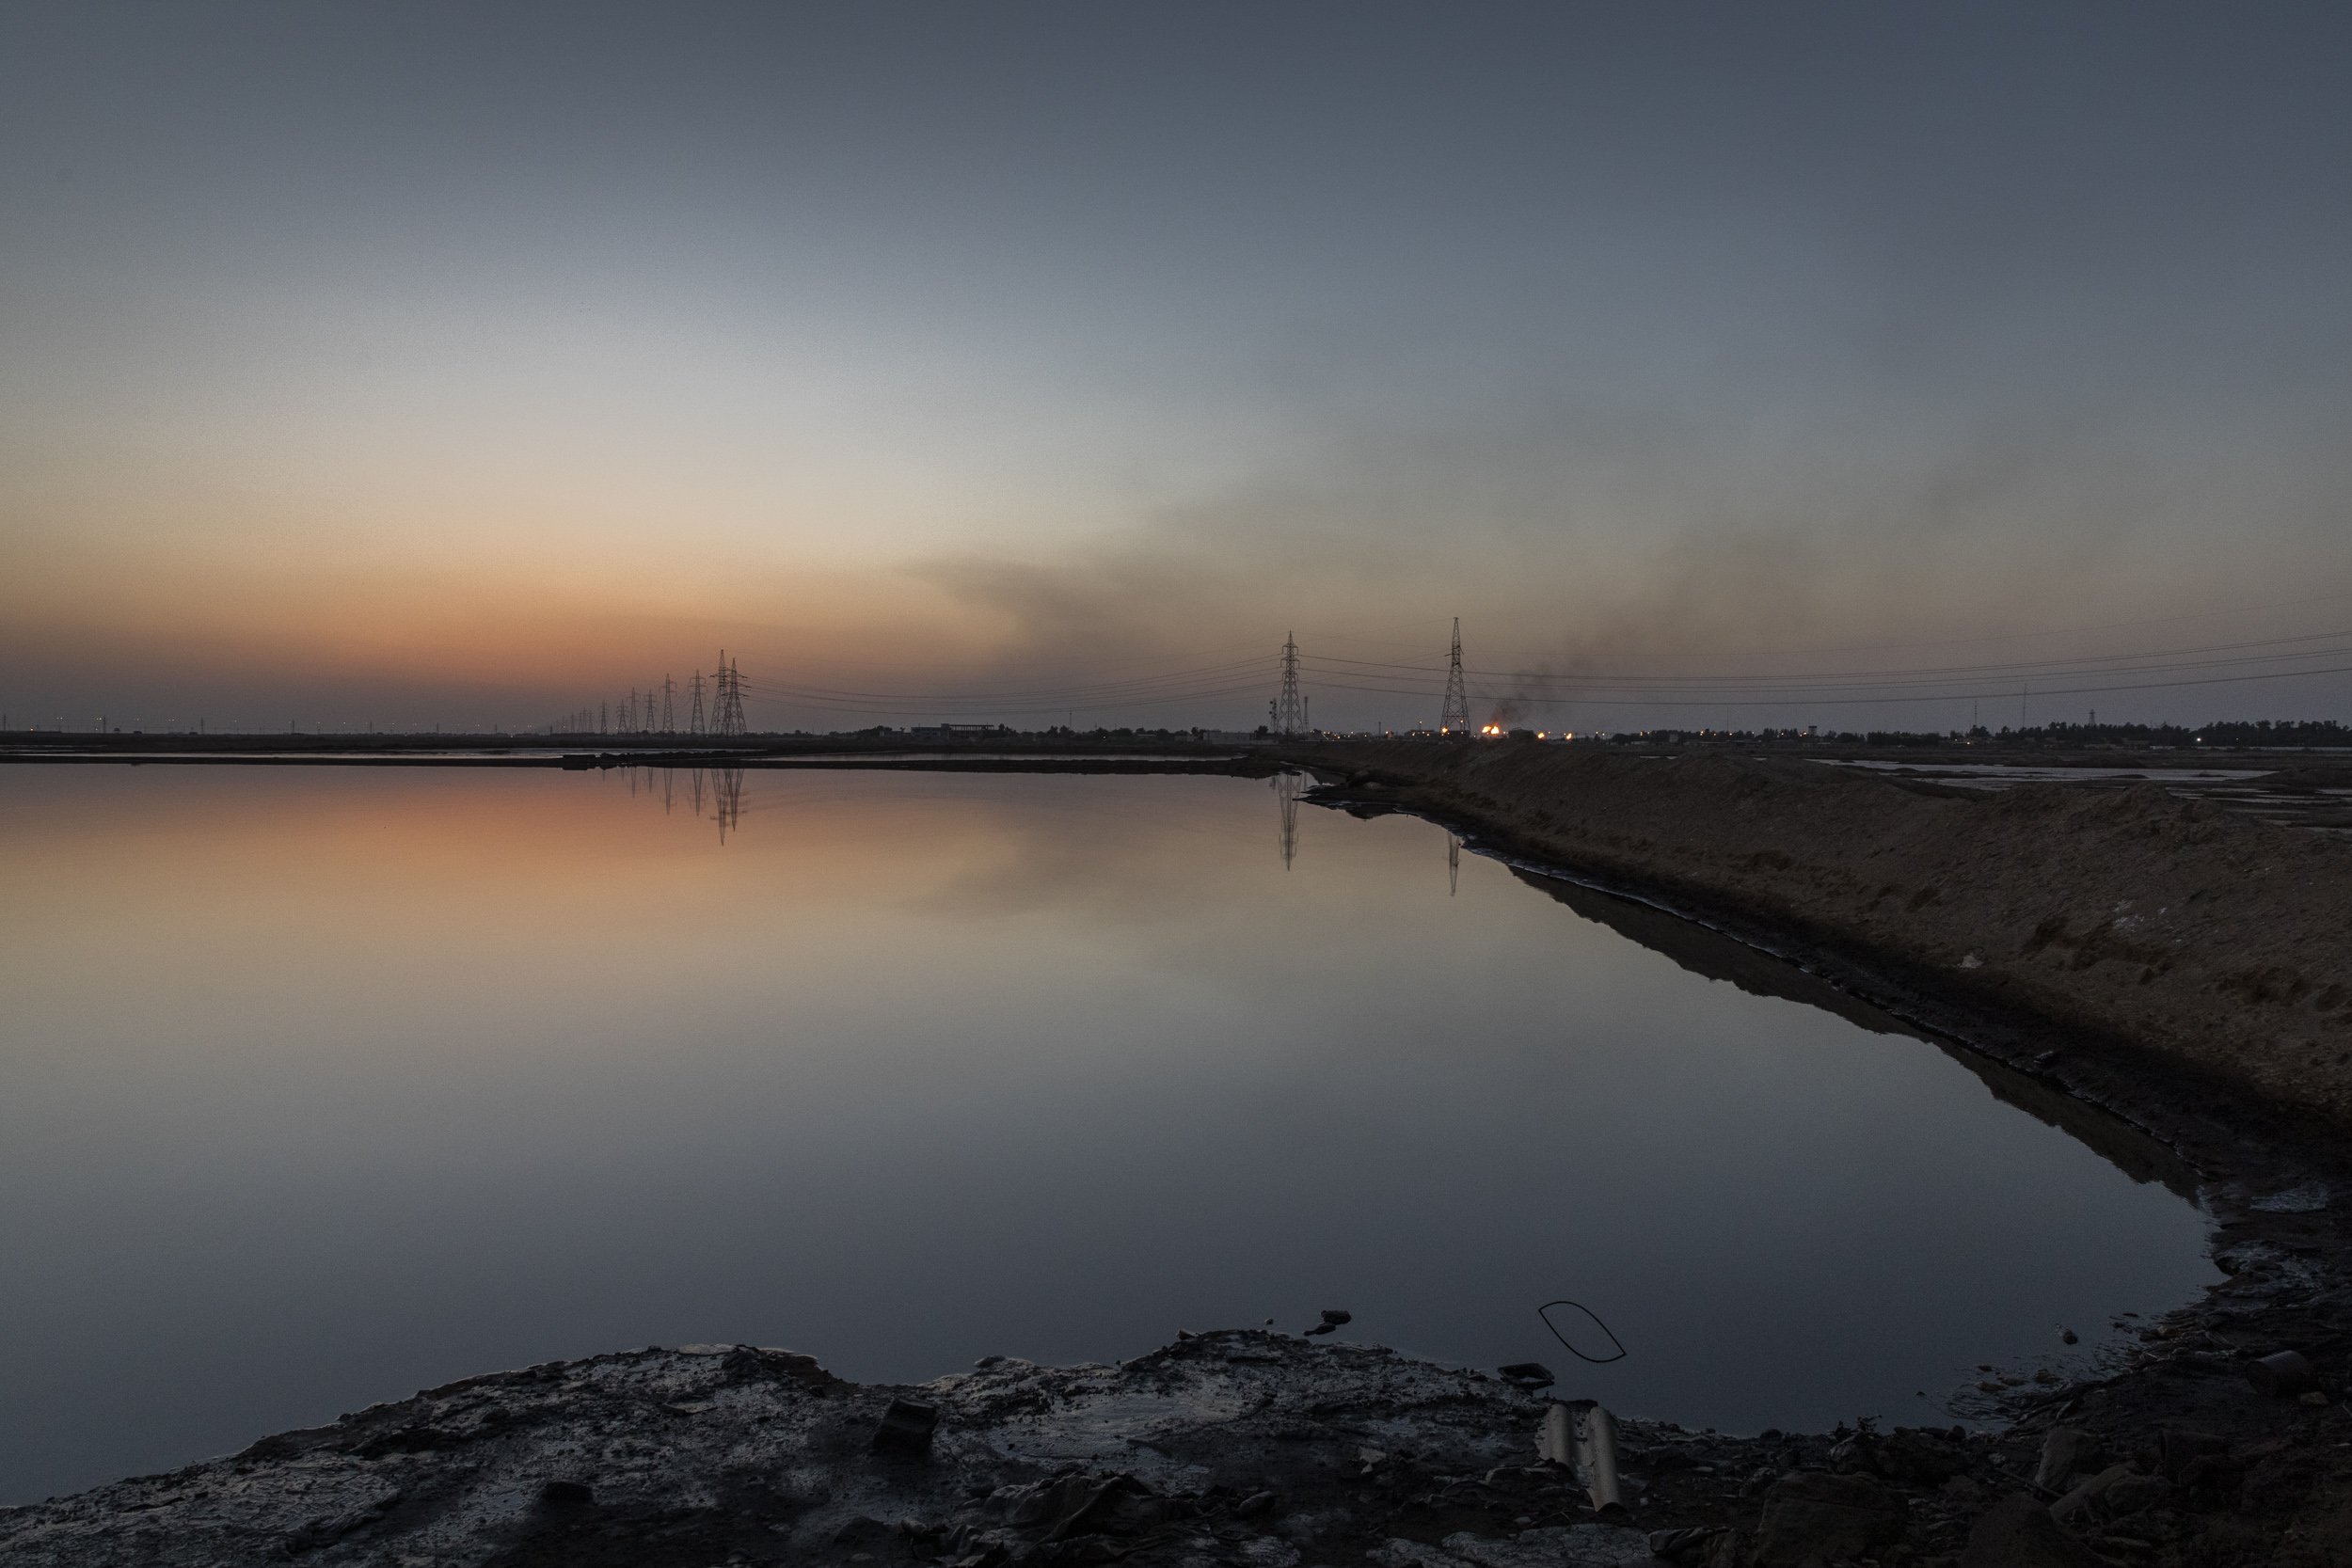  A tailing pond full of oily water that is by-product of oil exploration, sits less than a few kilometres from the village village Nahran Bin Omran,  a heavily polluted area 15km north of Basra city. 